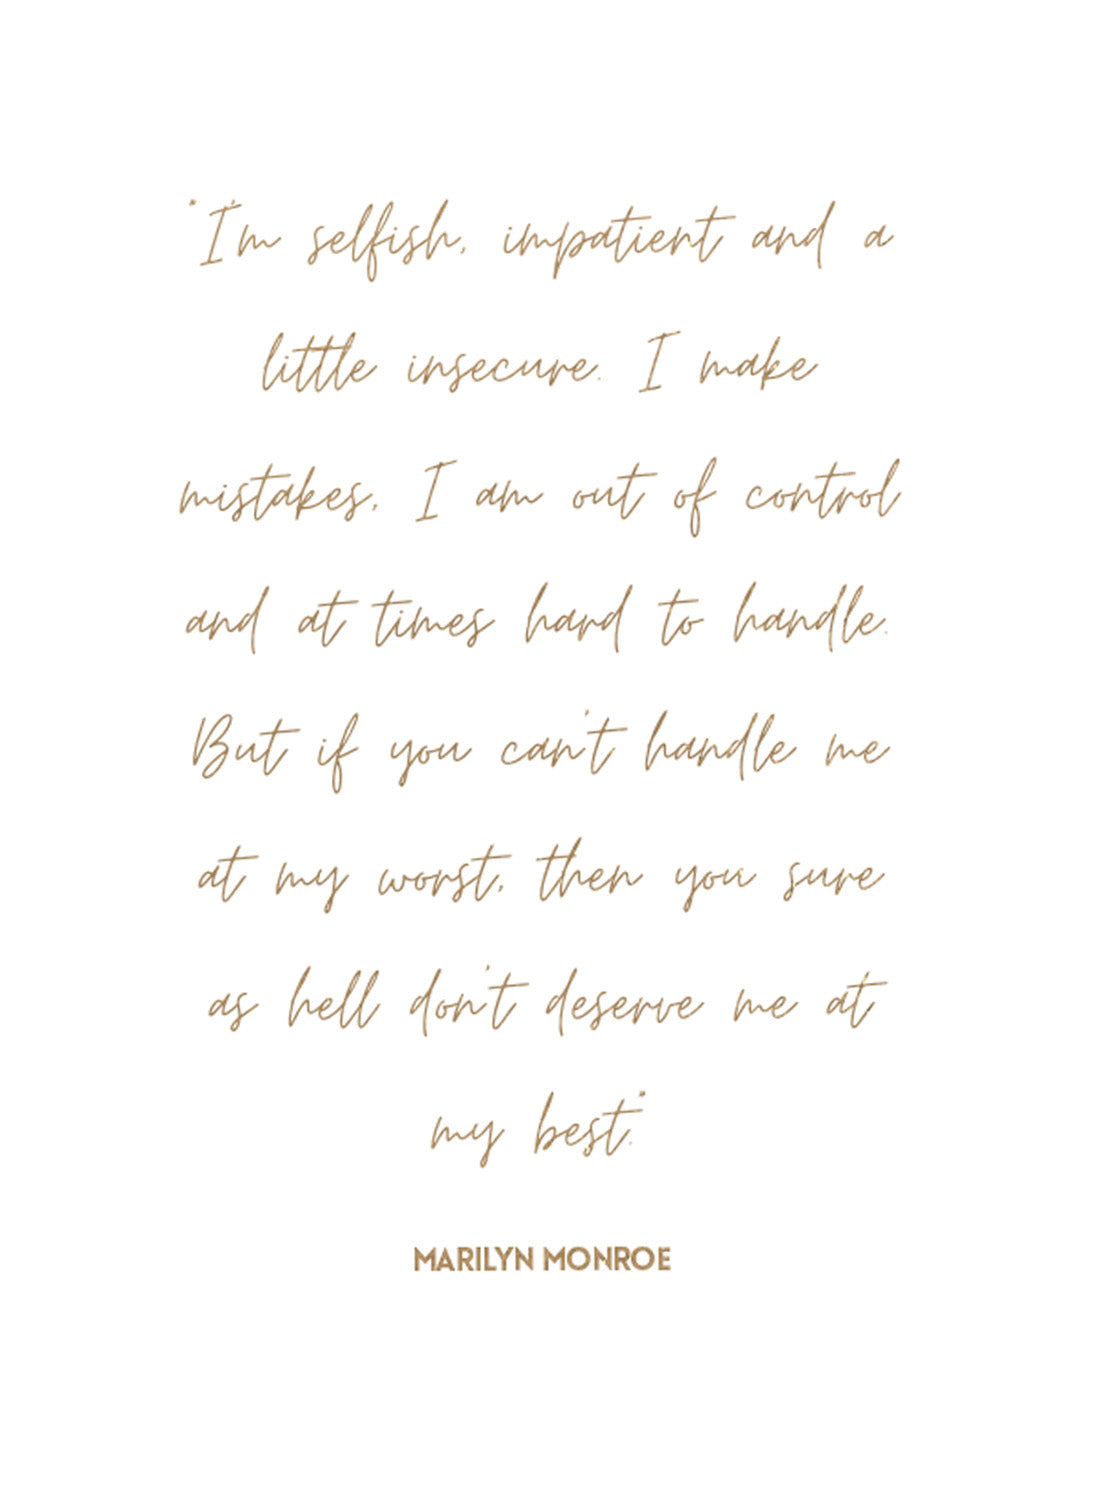 MARILYN GOLD QUOTE